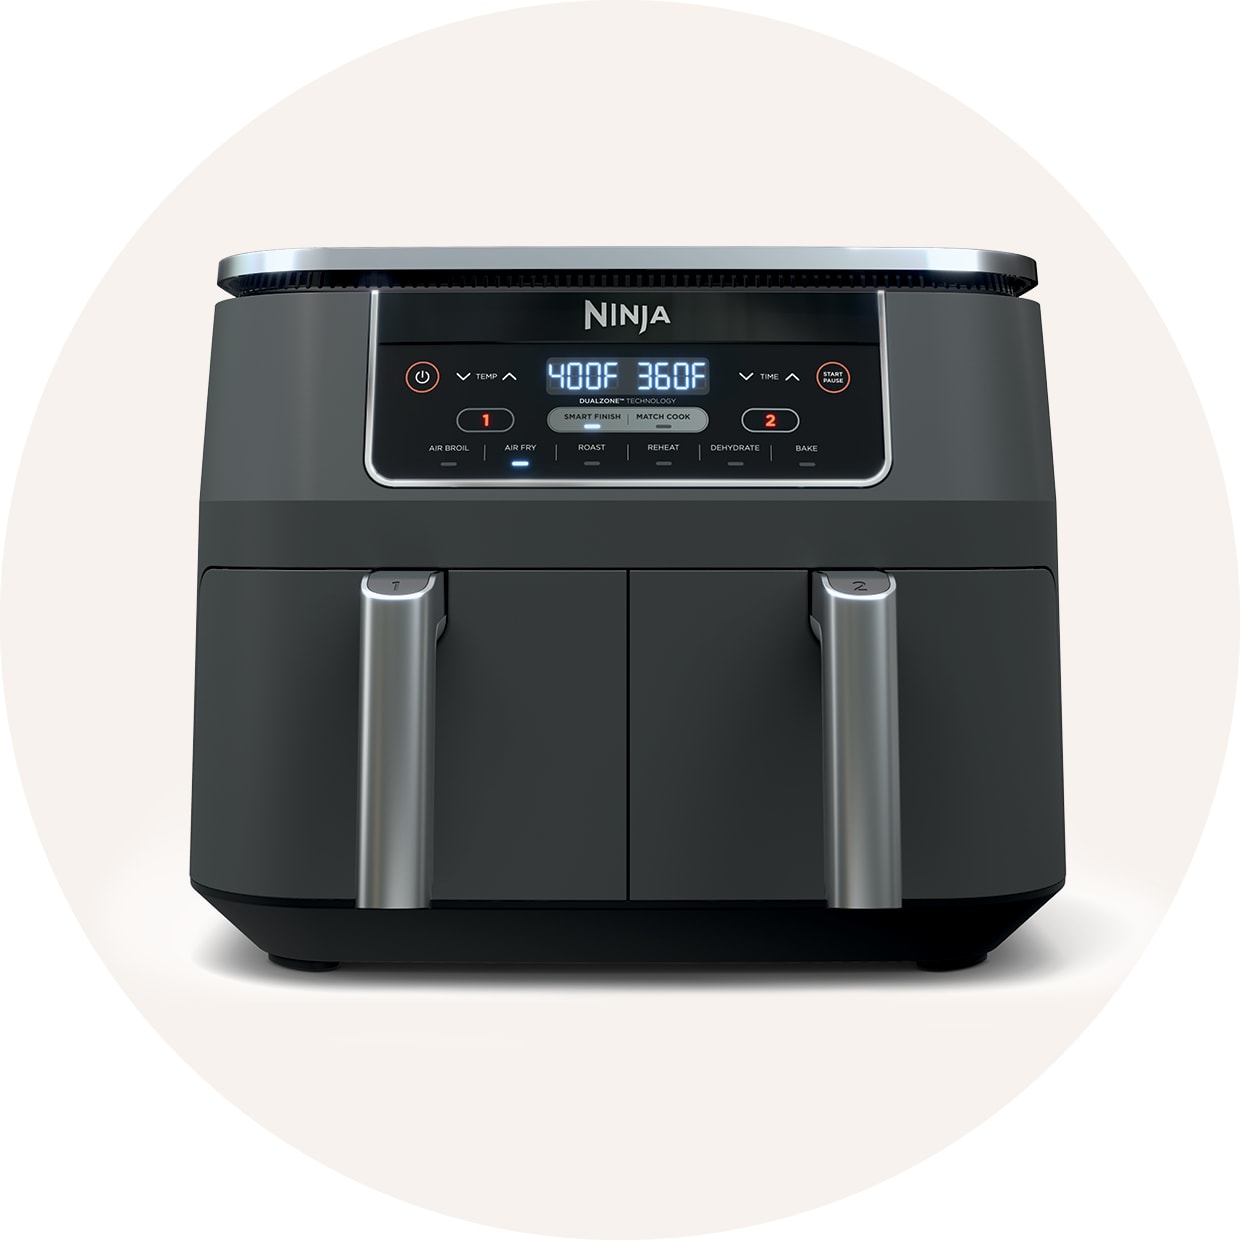 Ninja Cooking Collection at Currys  Order online or collect in store on Ninja  Cooking products